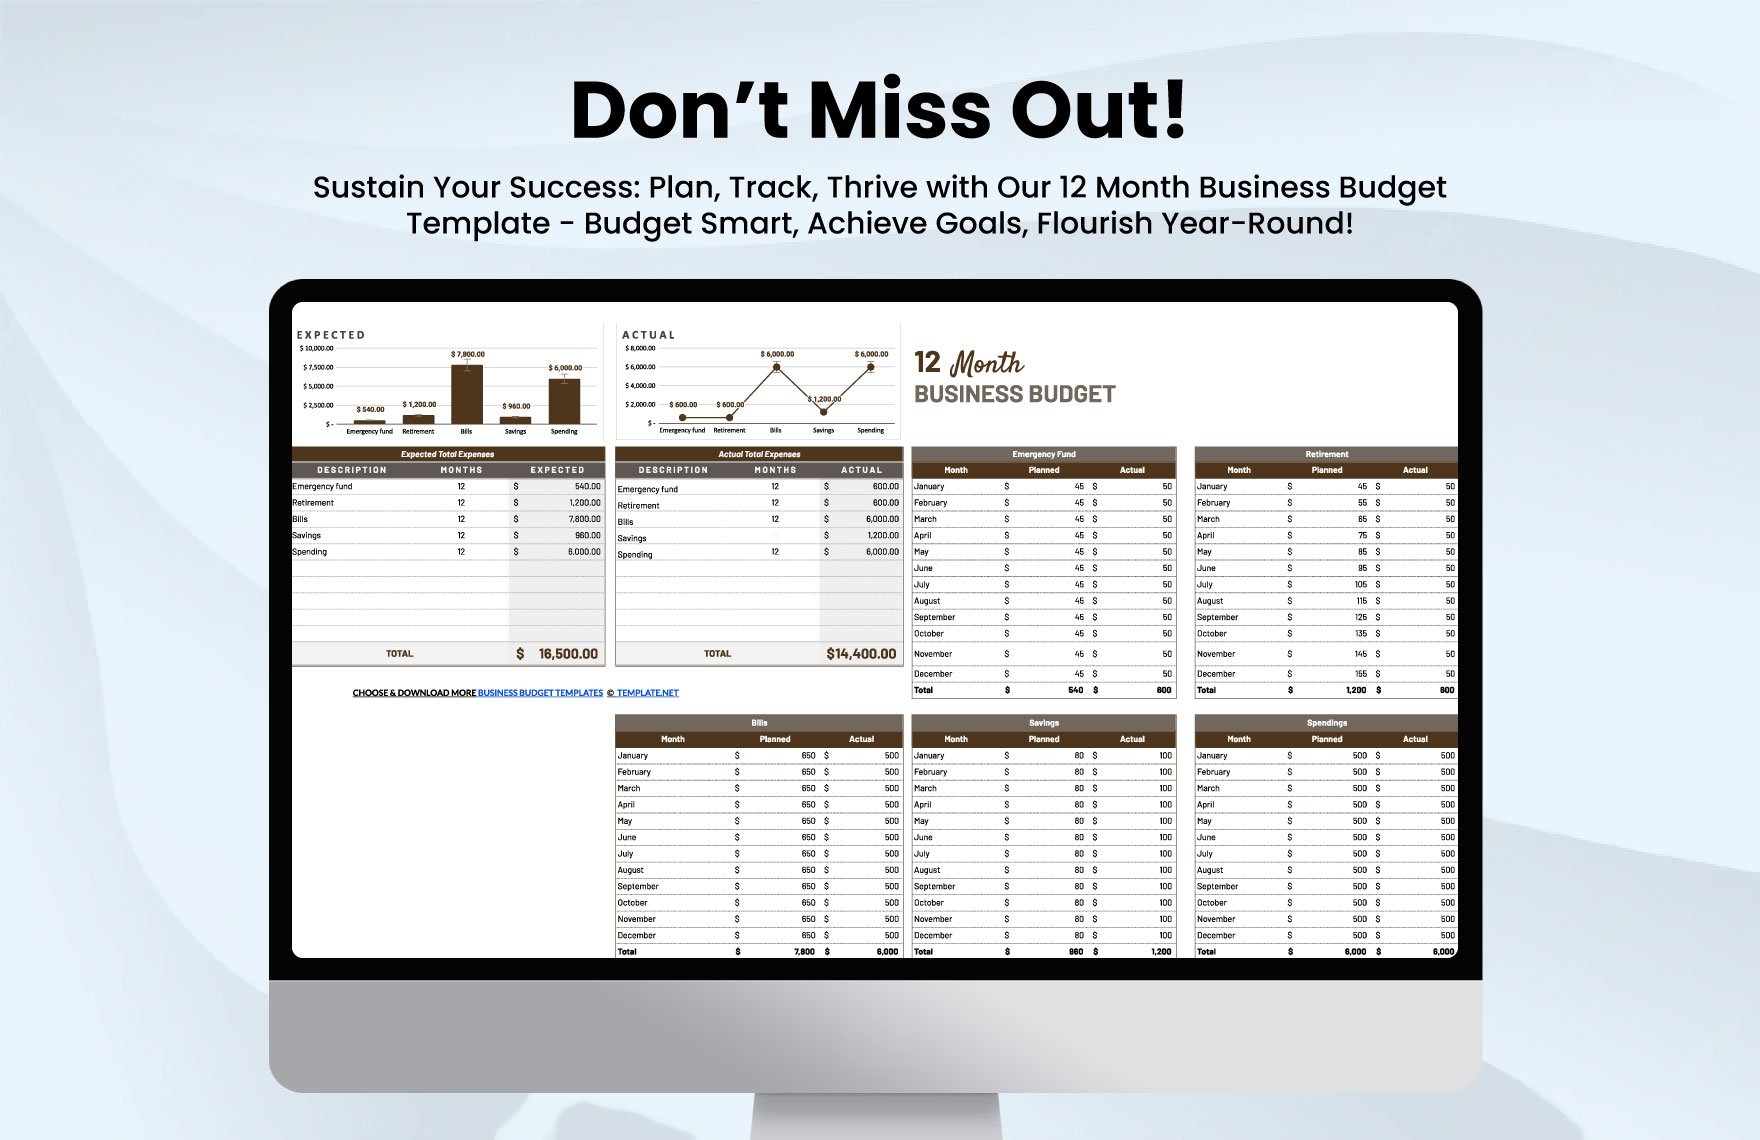 12 Month Business Budget Template